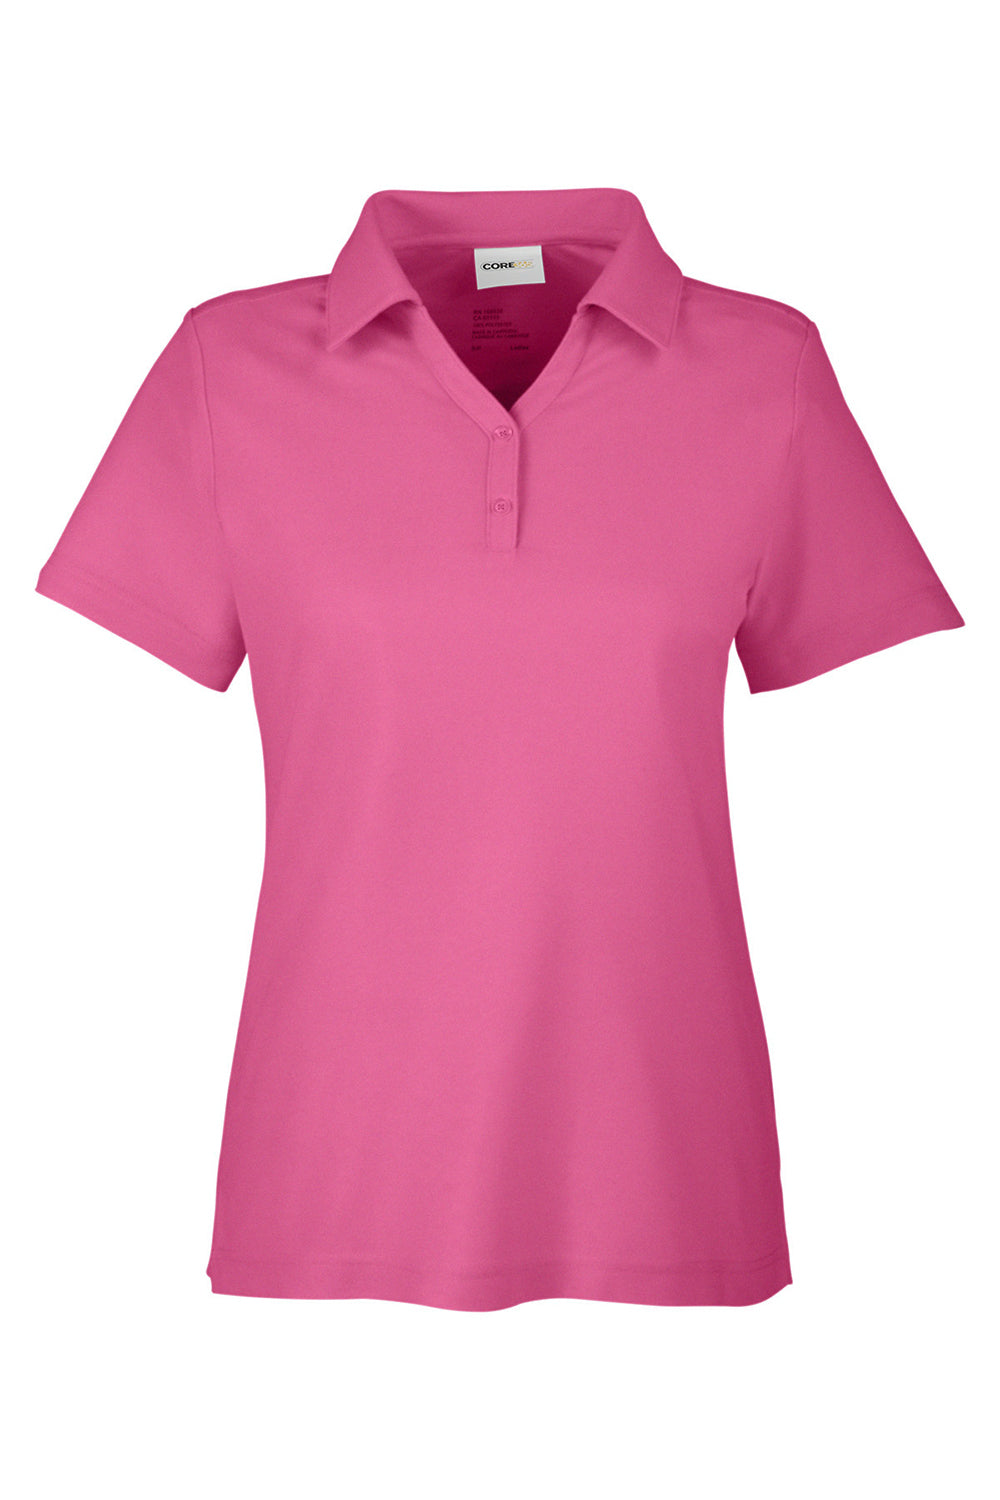 Core 365 CE112W Womens Fusion ChromaSoft Performance Moisture Wicking Pique Short Sleeve Polo Shirt Charity Pink Flat Front